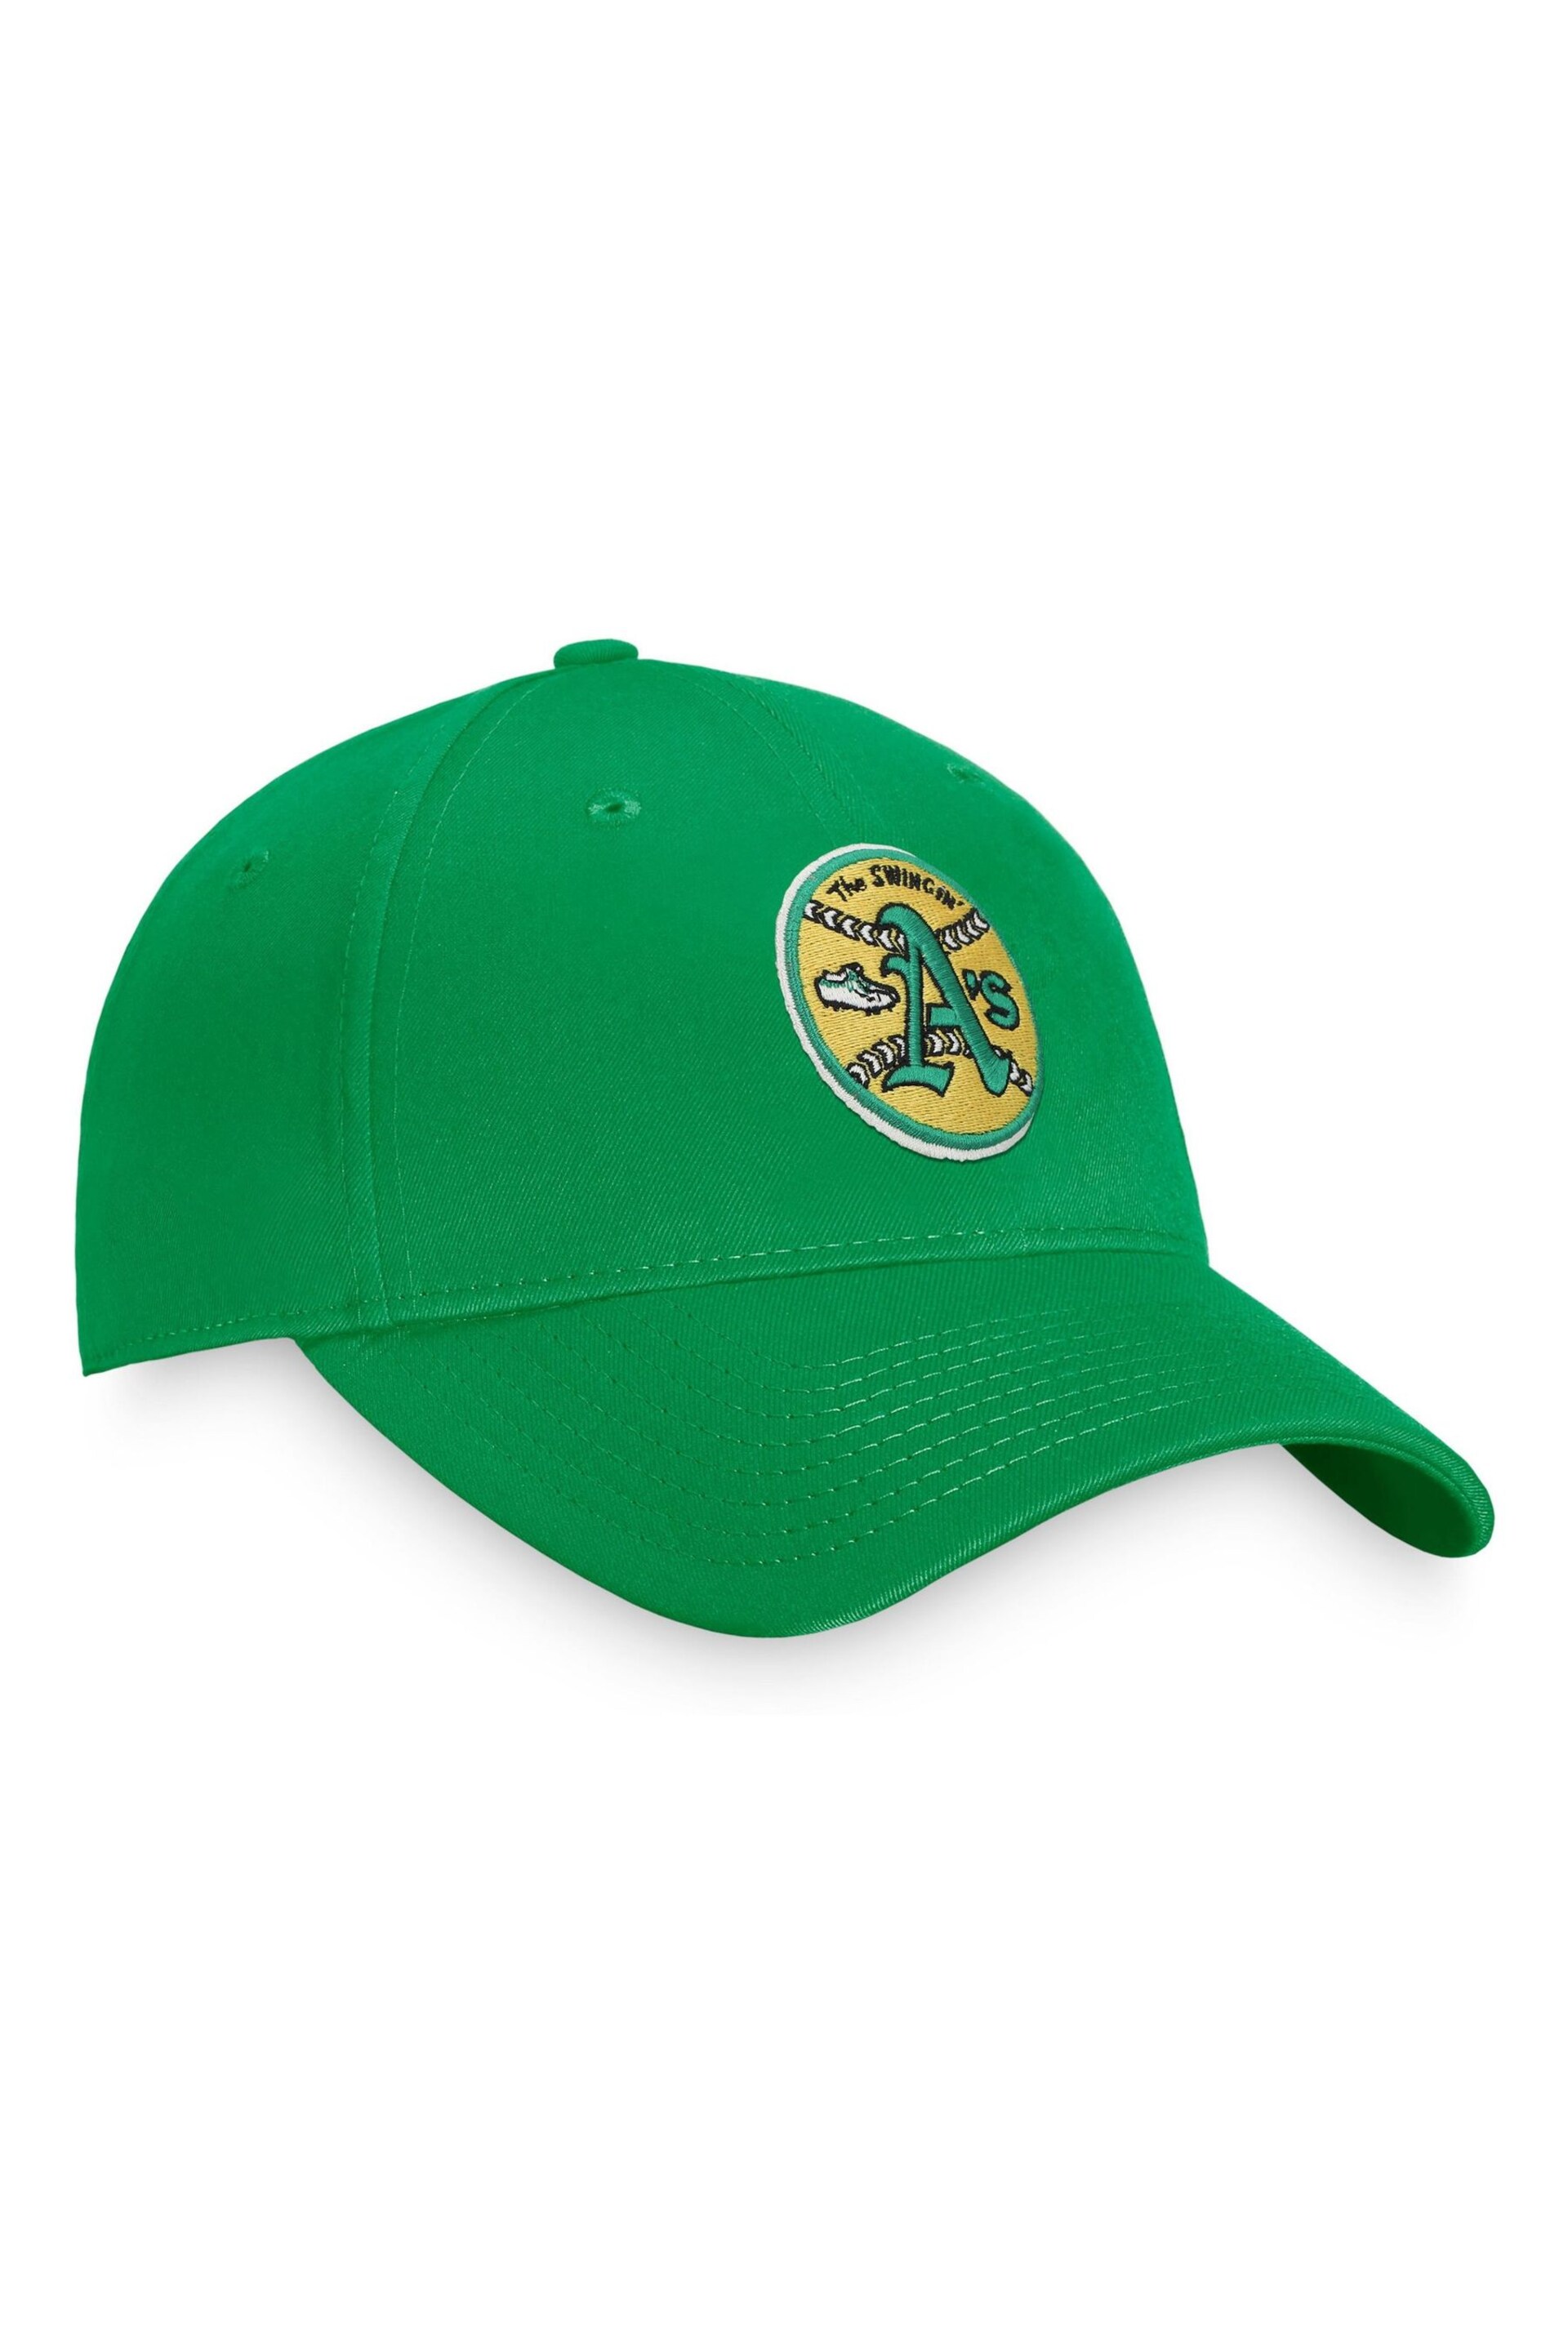 adidas Green MLB Oakland Athletics Core Coop Structured Adjustable Cap - Image 2 of 4